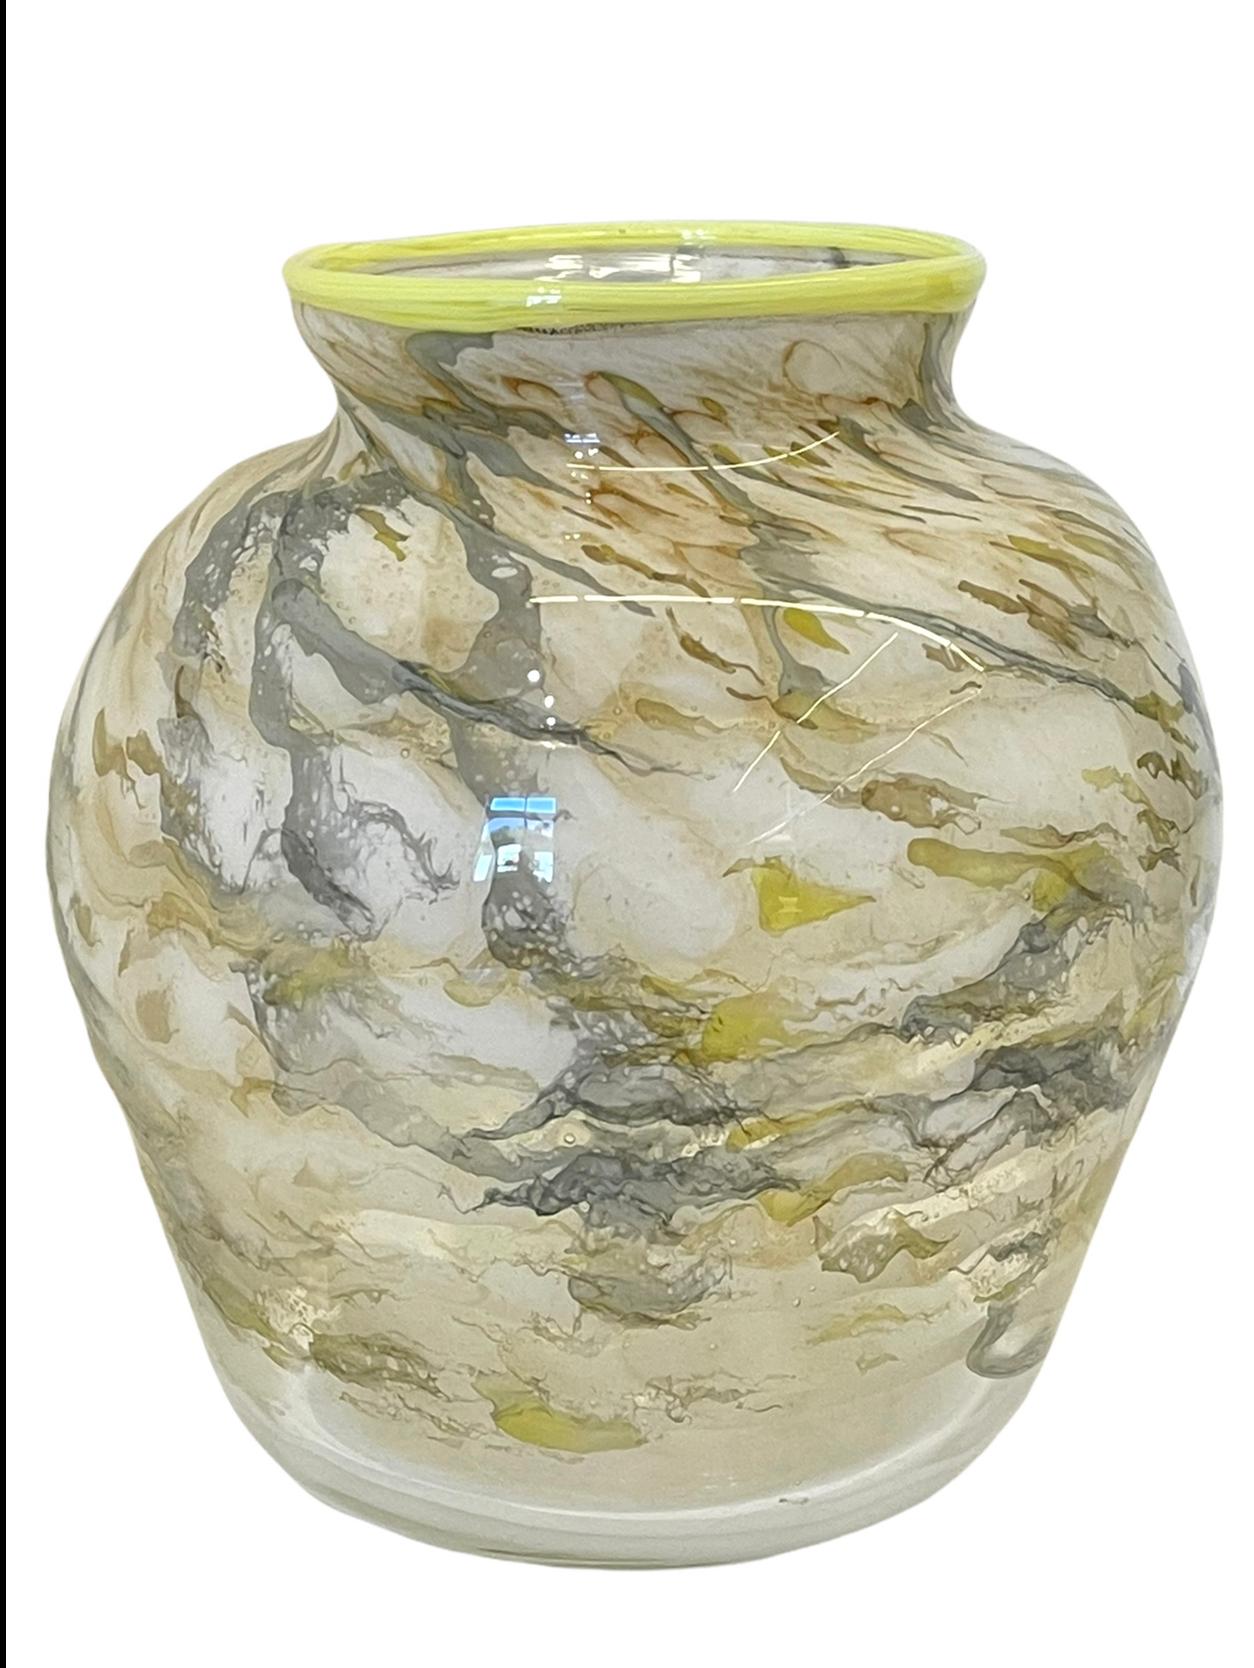 Measures: 8.25 x 7”Diameter

Beautiful signed art glass vase. Featuring ribbons of gold, grey and cream tones with a vibrant yellow/green ribbon around the top edge. Signed “Jim Bowman 95”.